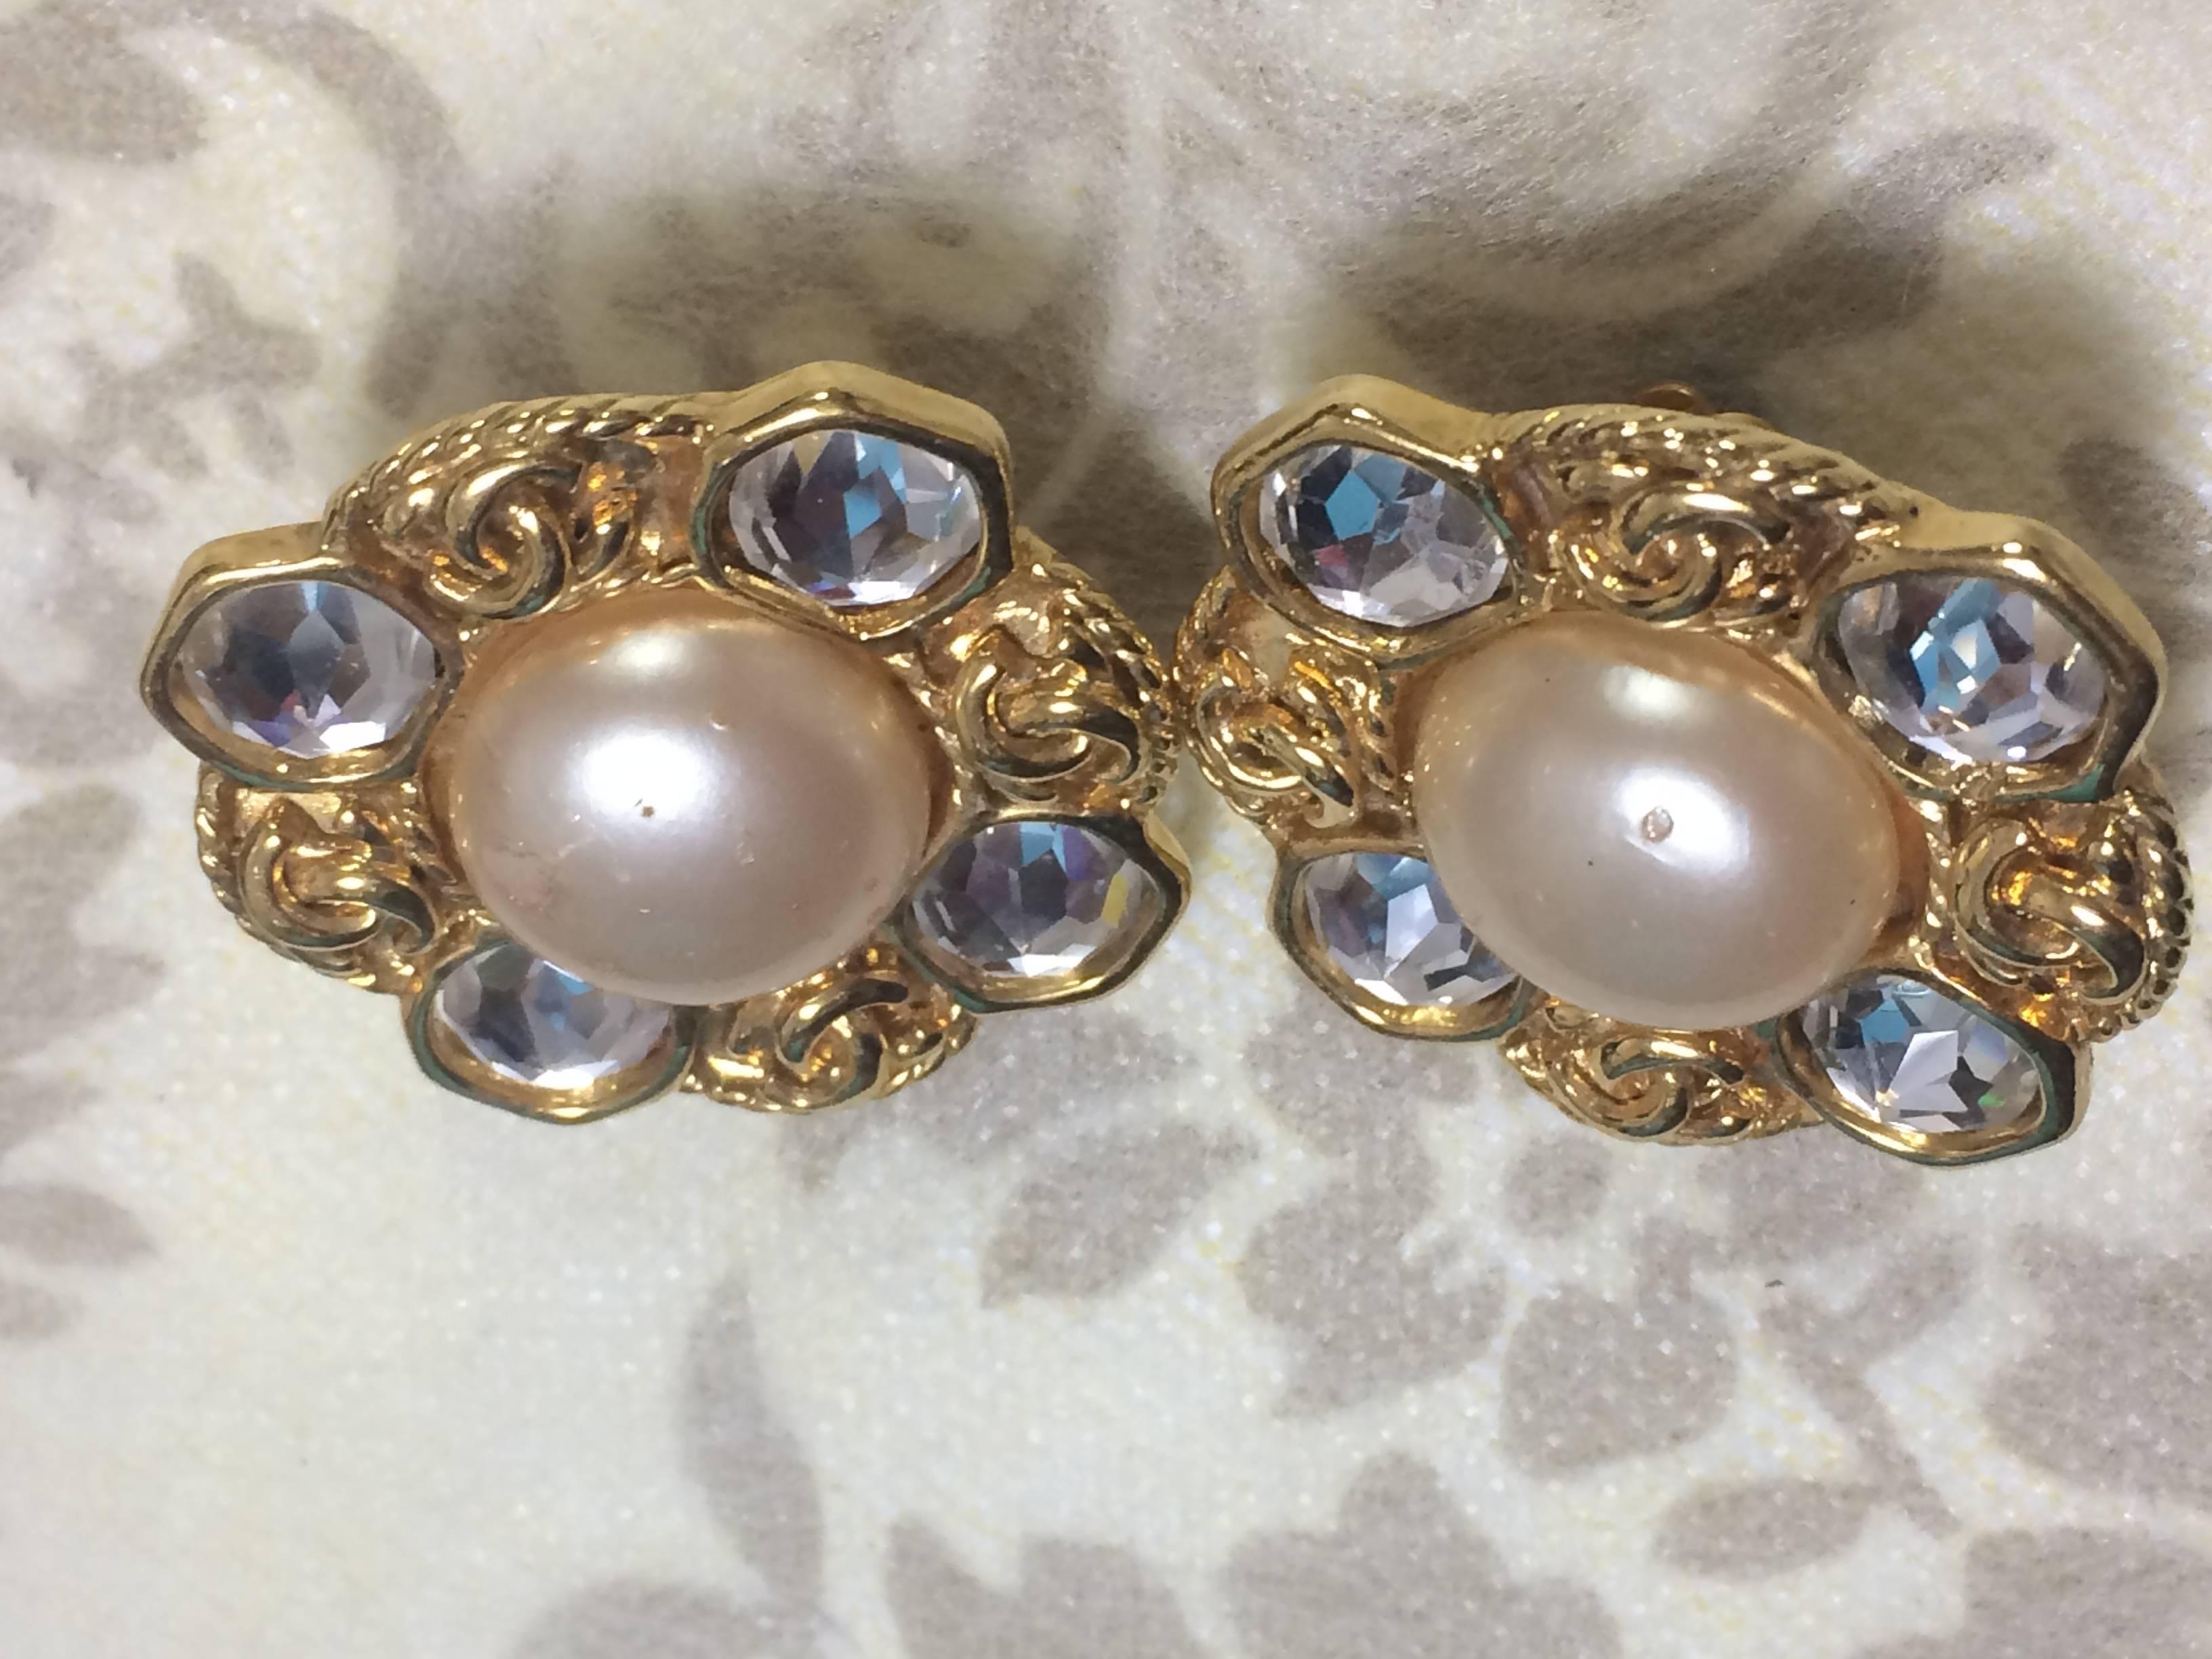 Vintage CHANEL gold tone earrings with a faux pearl, Swarovski crystal stones In Good Condition For Sale In Kashiwa, Chiba